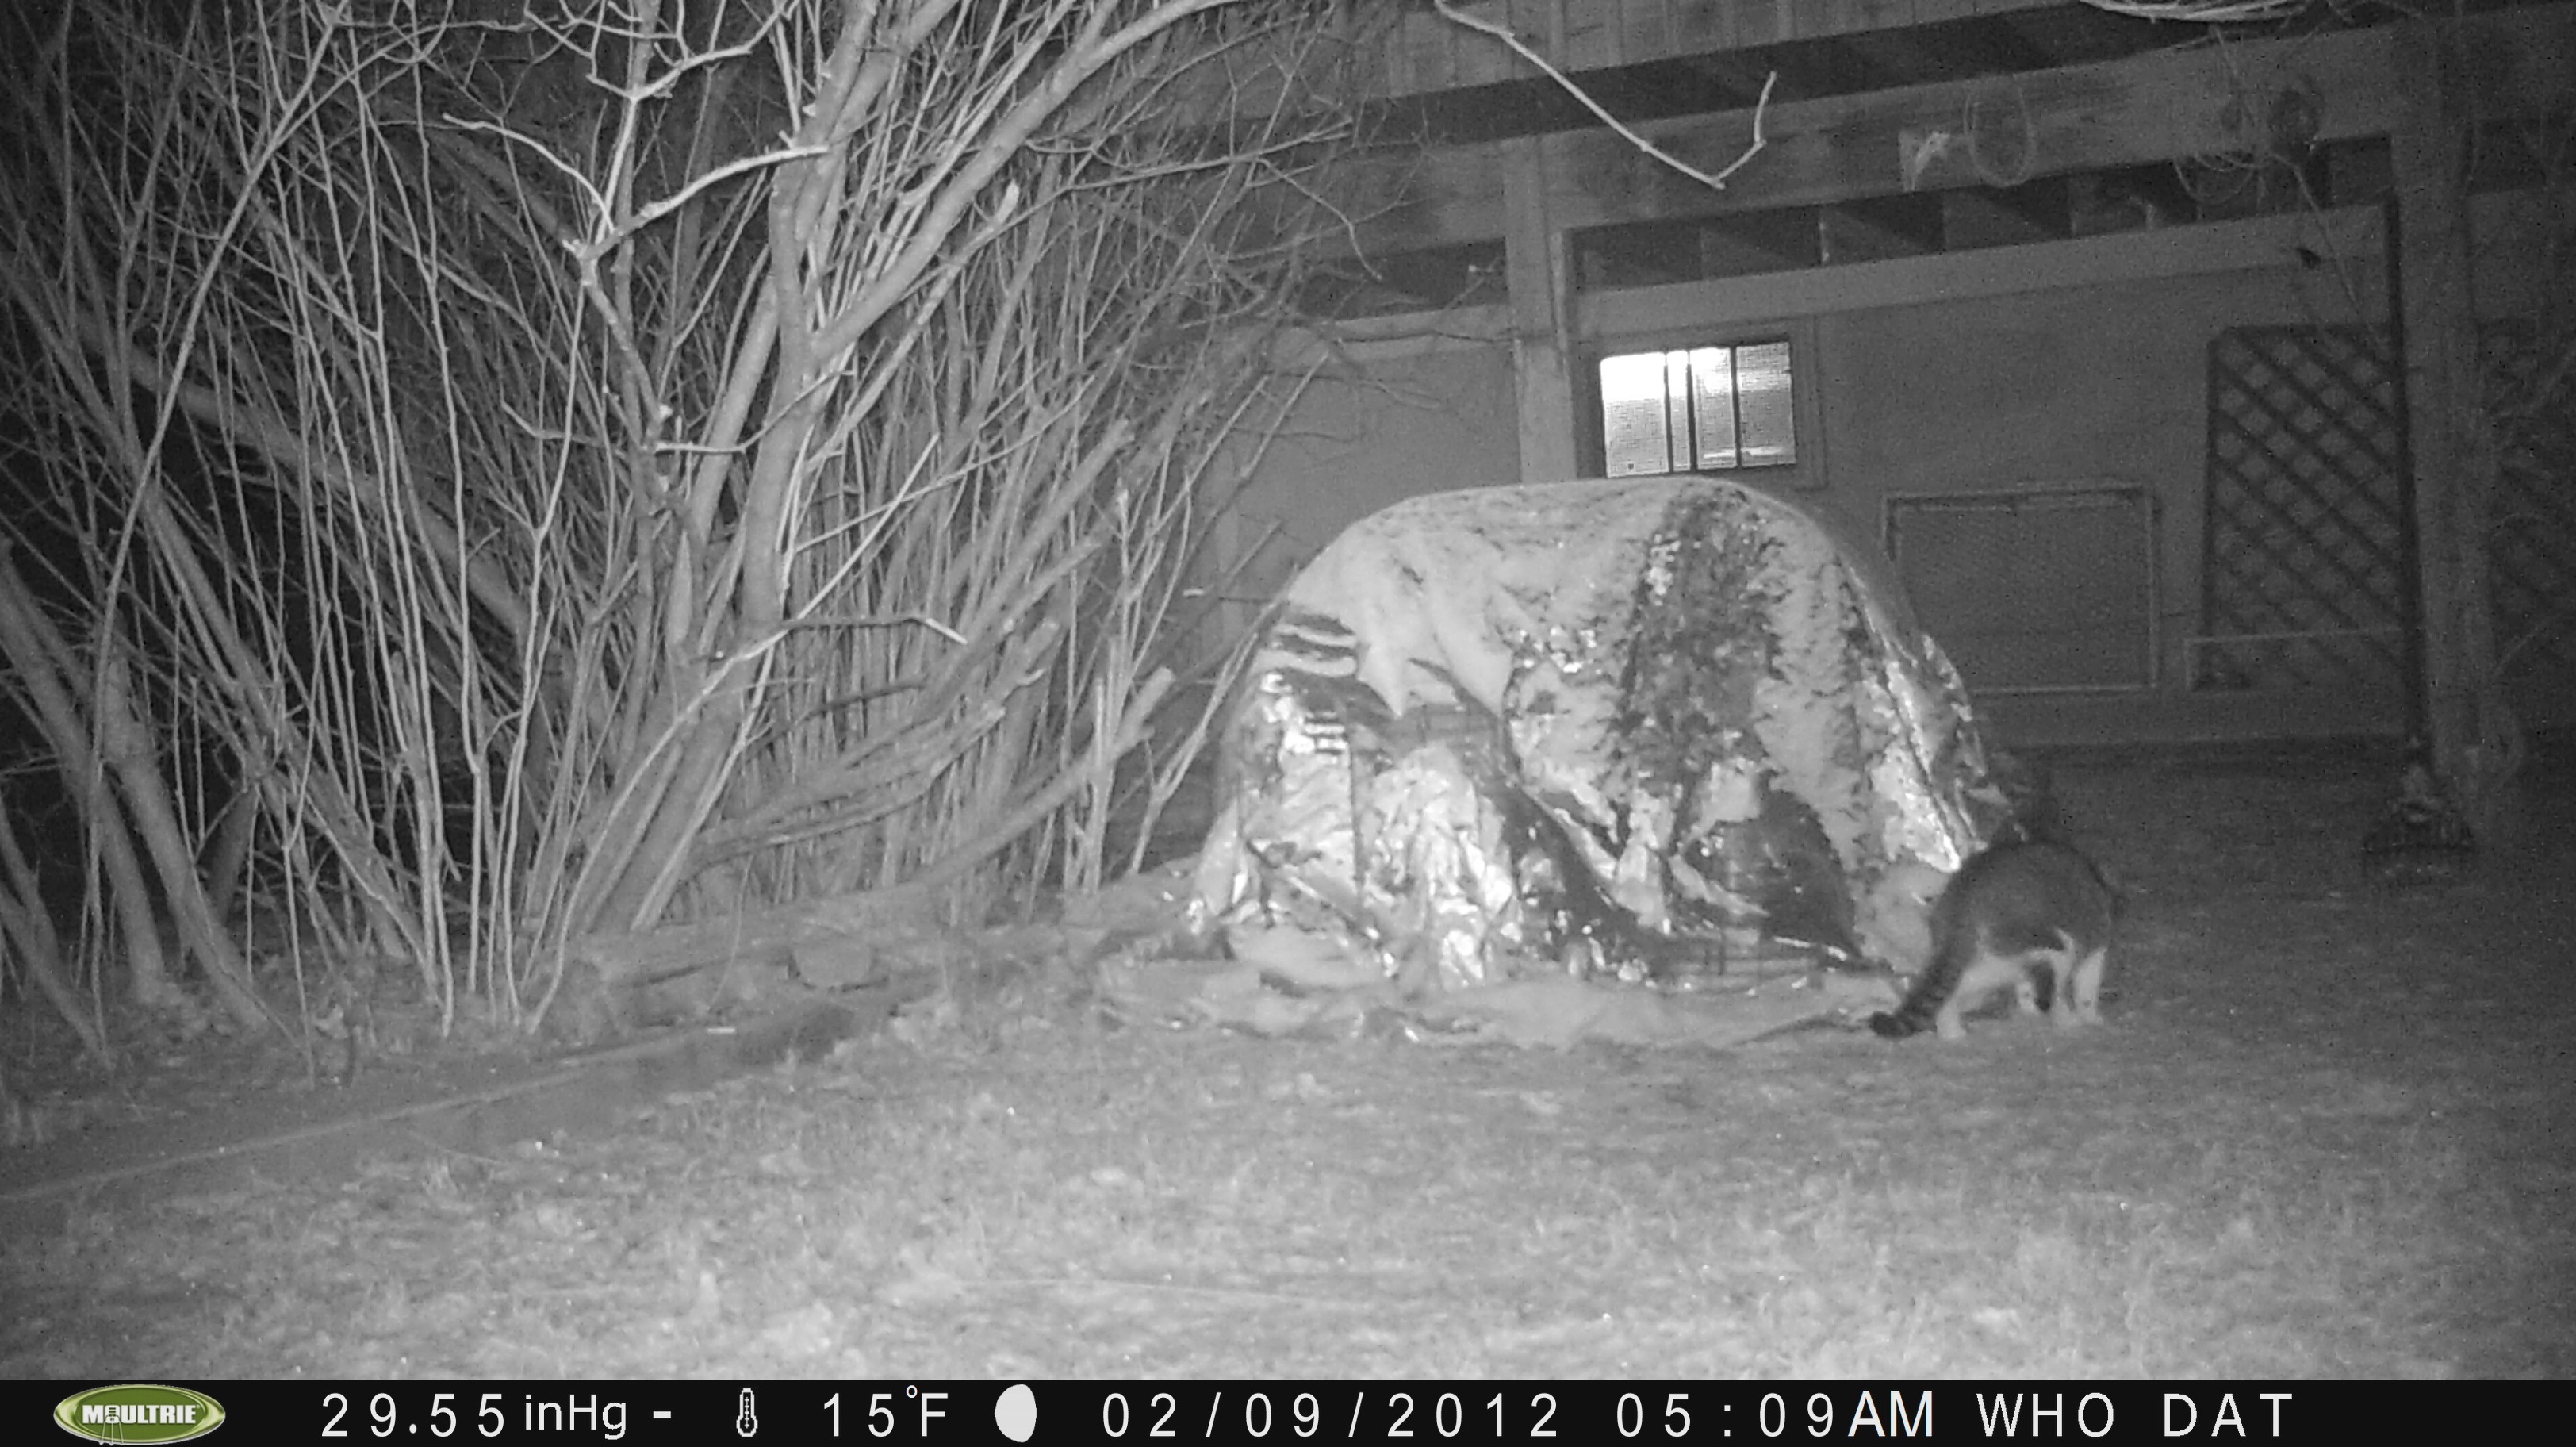 Got this early in the morning on my Moultrie M-100.  housecat or raccoon???

gamecam1.jpg